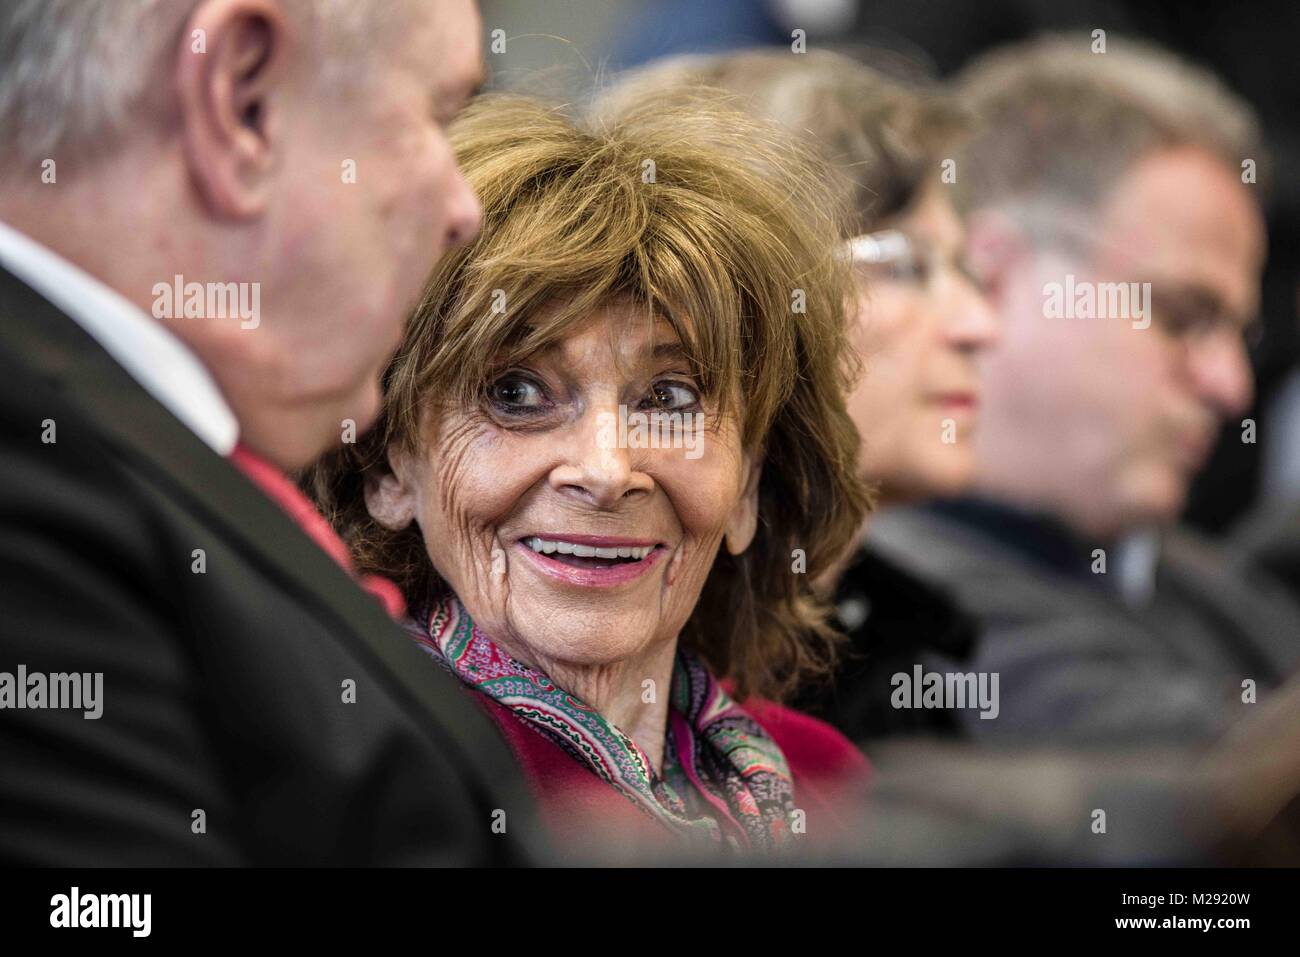 Munich, Bavaria, Germany. 6th Feb, 2018. Charlotte Knoblauch. The City of Munich, Germany dedicated the plaza adjacent to the National Socialism Documentation Center (NS-Dokumentationszentrum) building to Holocaust survivor Max Mannheimer. Mannheimer was an author, painter, and prolific speaker about the experience. He and his brother were the only family members to survive. Mannheimer was born on Feb. 6, 1920 in Northern Moravia and died on Sept. 23, 2016. Credit: ZUMA Press, Inc./Alamy Live News Stock Photo